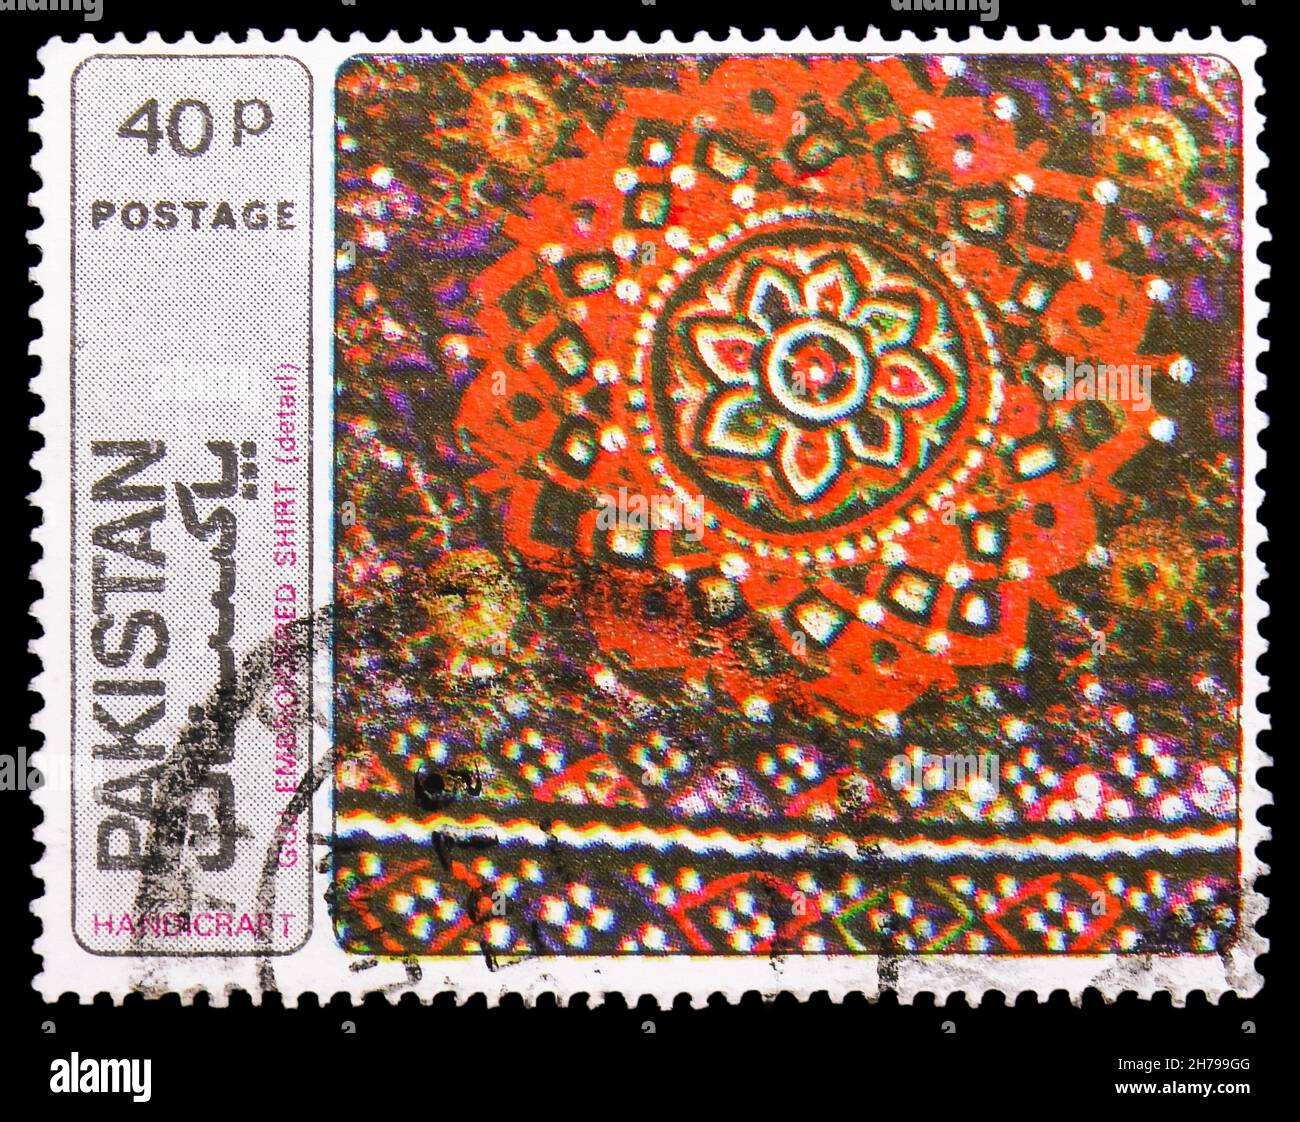 MOSCOW, RUSSIA - OCTOBER 25, 2021: Postage stamp printed in Pakistan shows Gujrat Embroideried Shirt, Pakistan Handi Crafts Series, circa 1979 Stock Photo